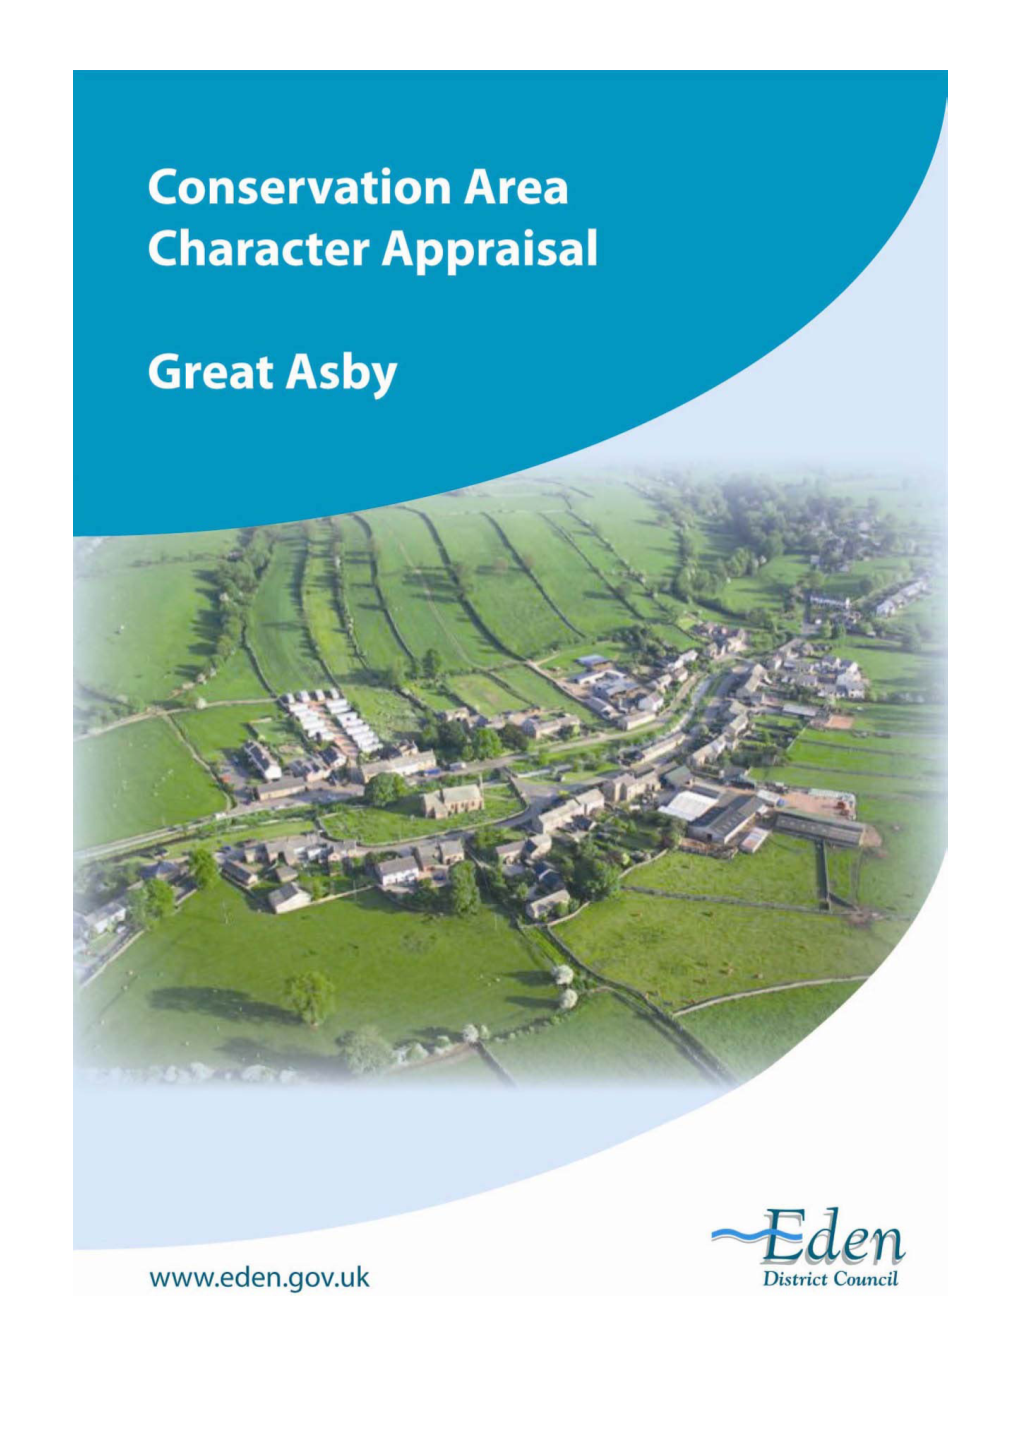 Conservation Area Character Appraisal